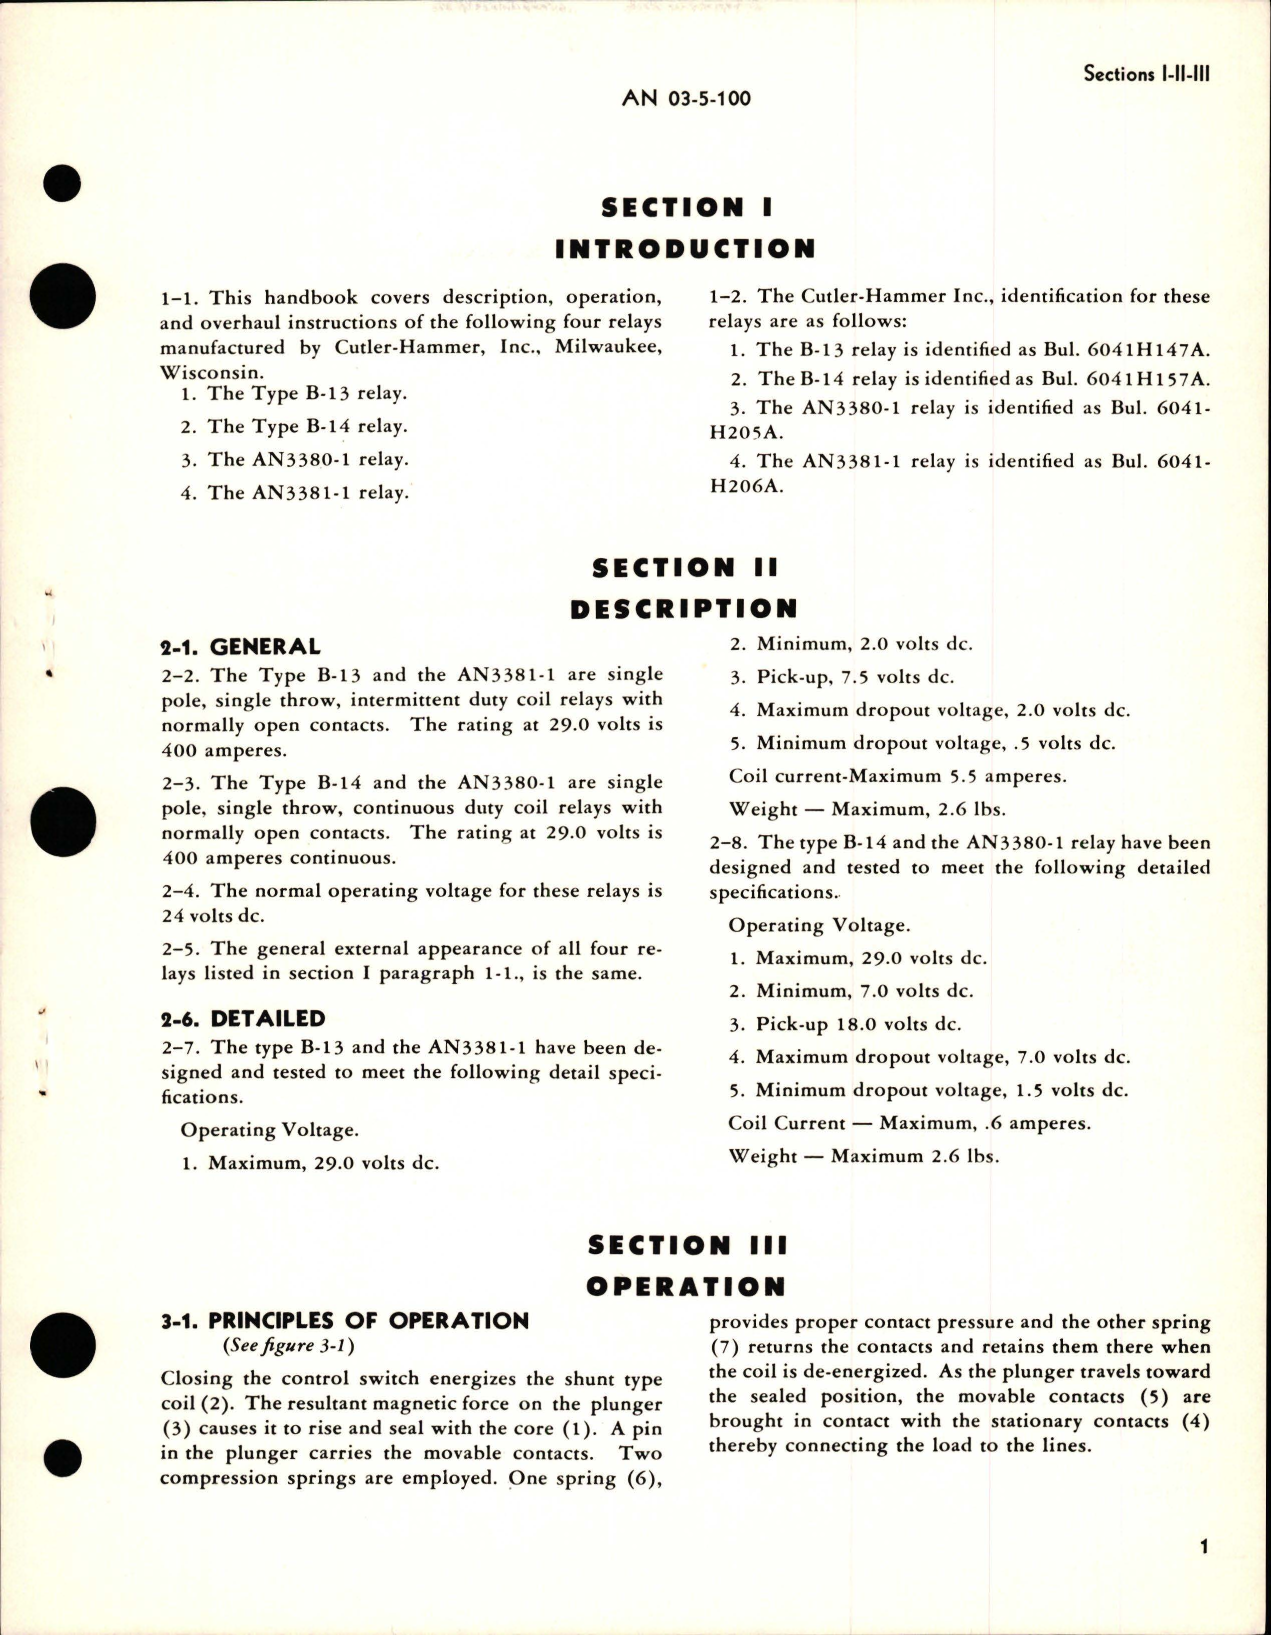 Sample page 5 from AirCorps Library document: Overhaul Instructions for Relays - Types B-13, B-14, SAN3380-1, and AN3381-1